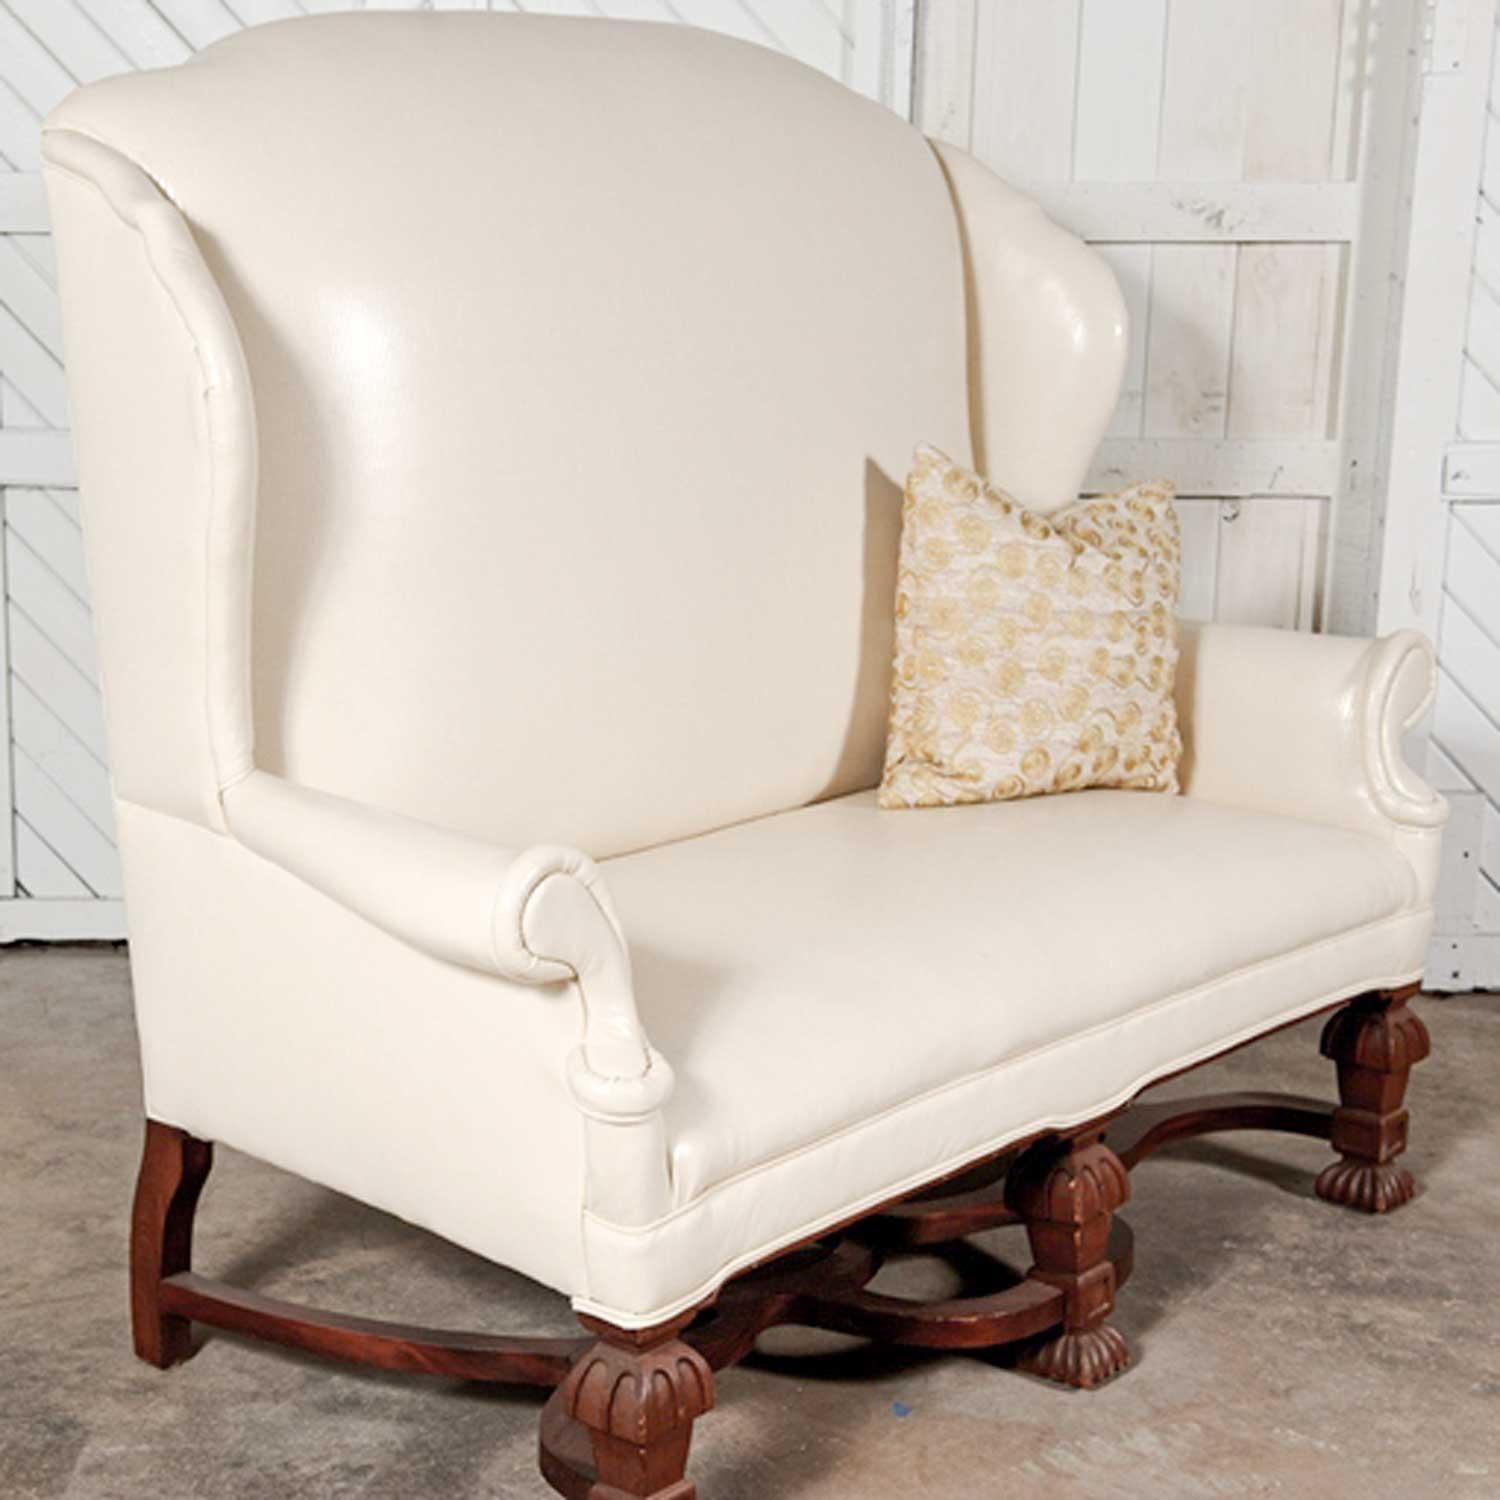 Beautiful Antique William and Mary Wingback settee with white faux leather upholstery and solid wood ornate base and feet. In excellent condition. Age appropriate wear to the feet. Please see photos. 

Just get a load of this stunning high-style,